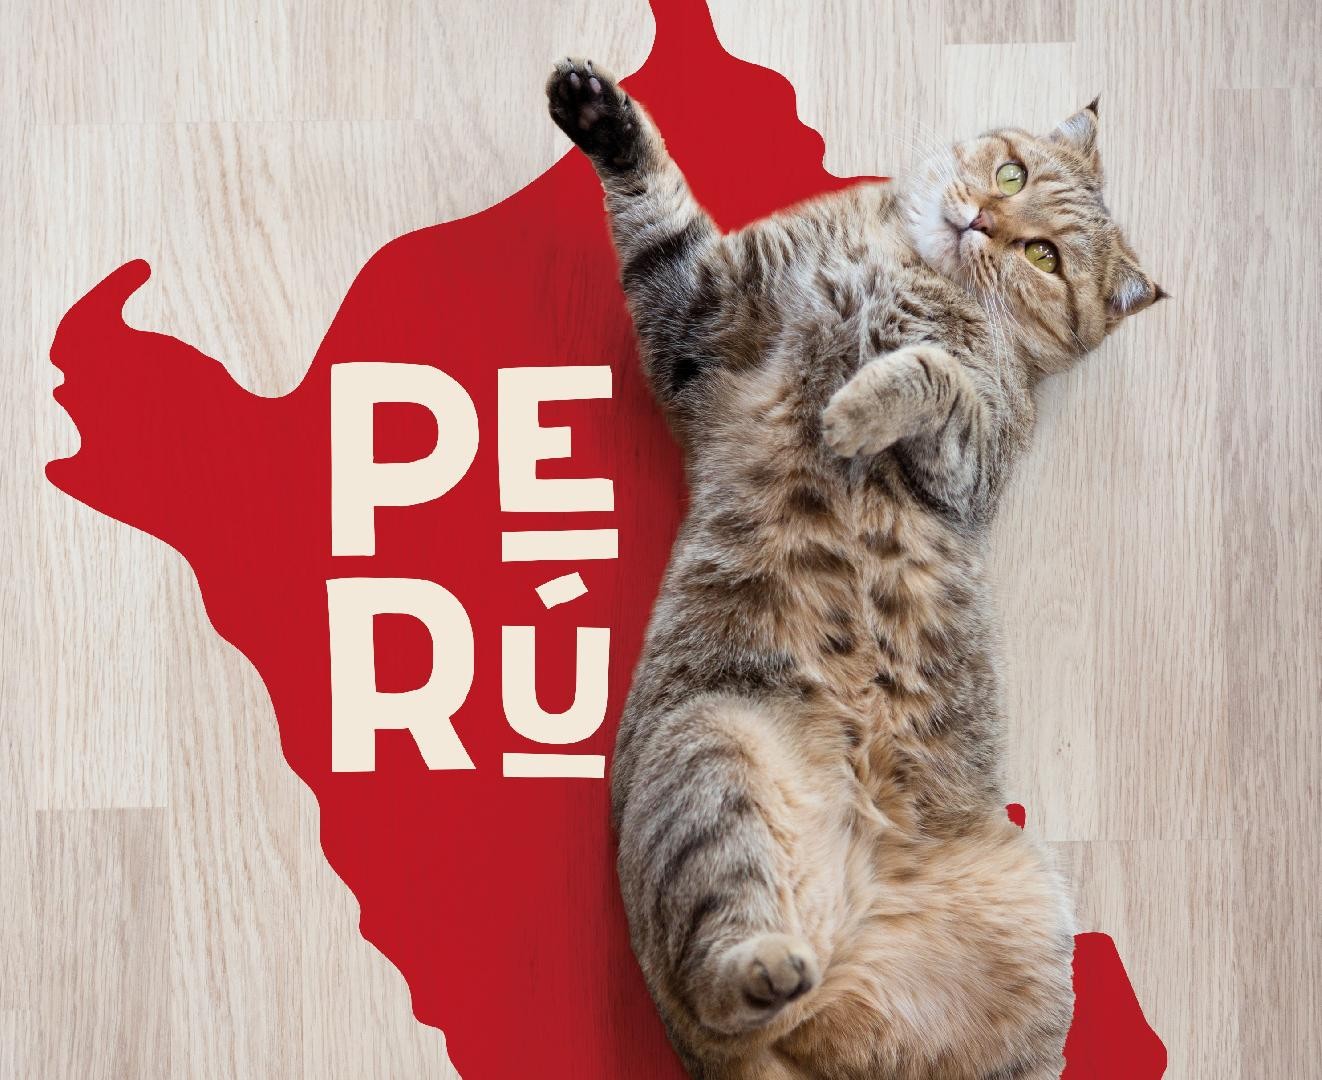 The Peru of pets: The pet food market in 2021